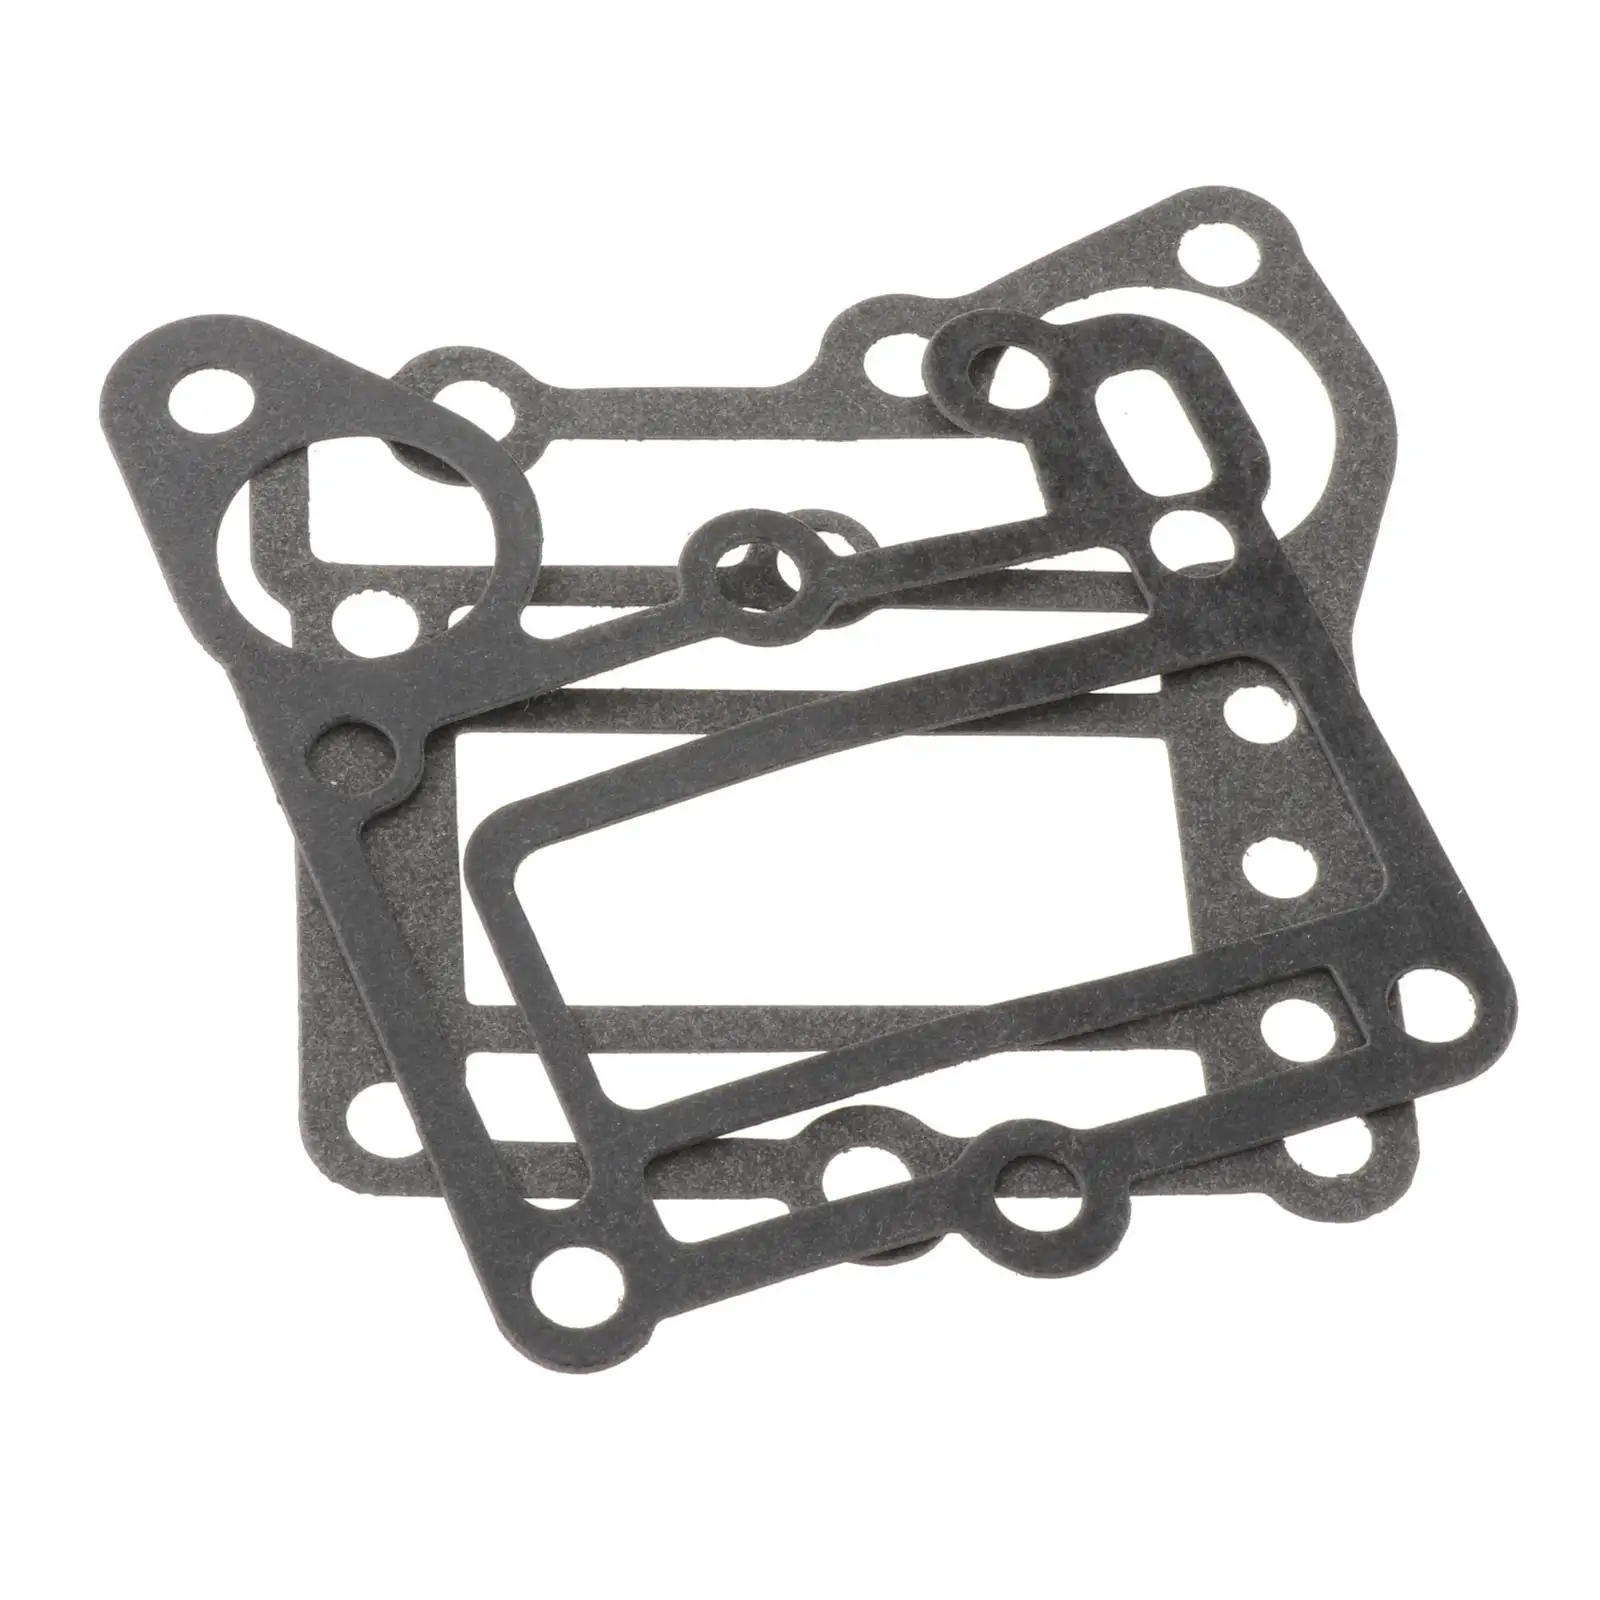 Exhaust Jacket Gaskets Fit for  Outboard Motor 2T 4HP 6E0 Model